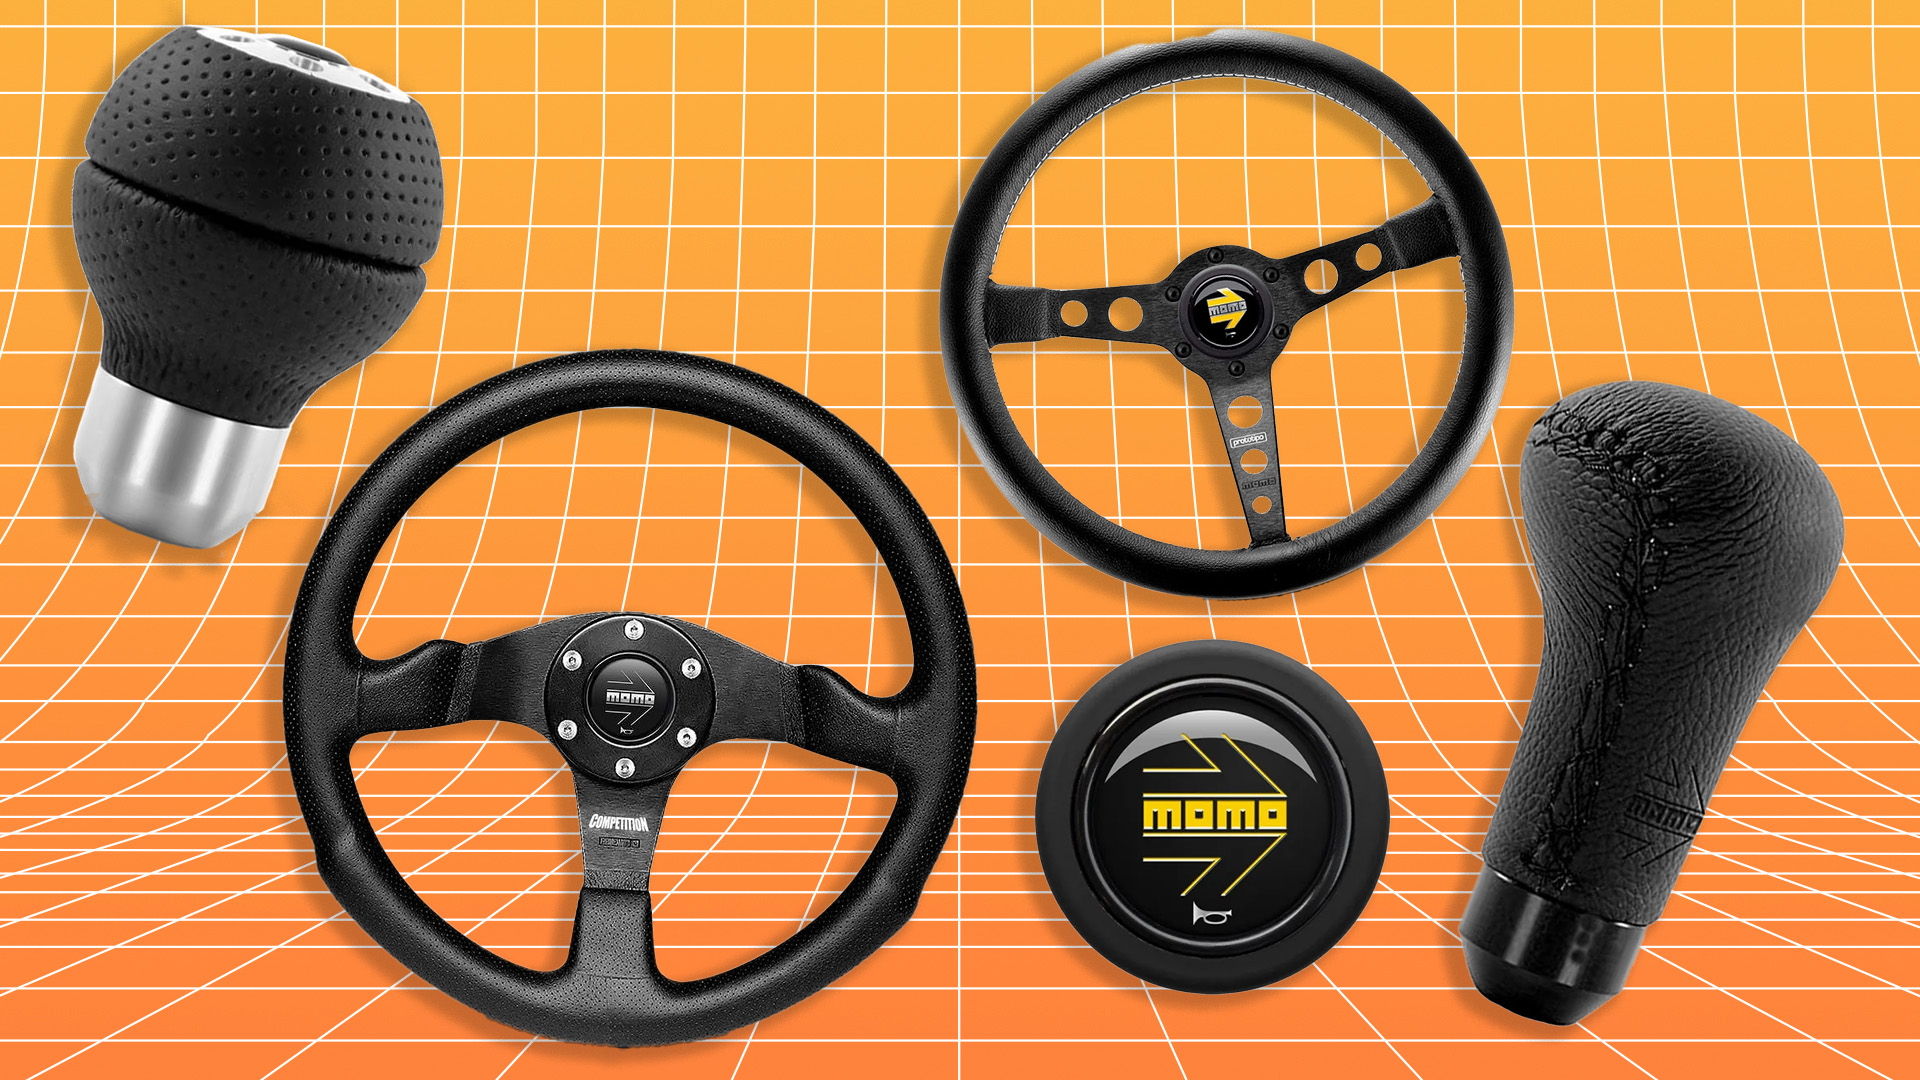 Big Discounts On My Favorite MOMO Steering Wheels And Shift Knobs at Amazon